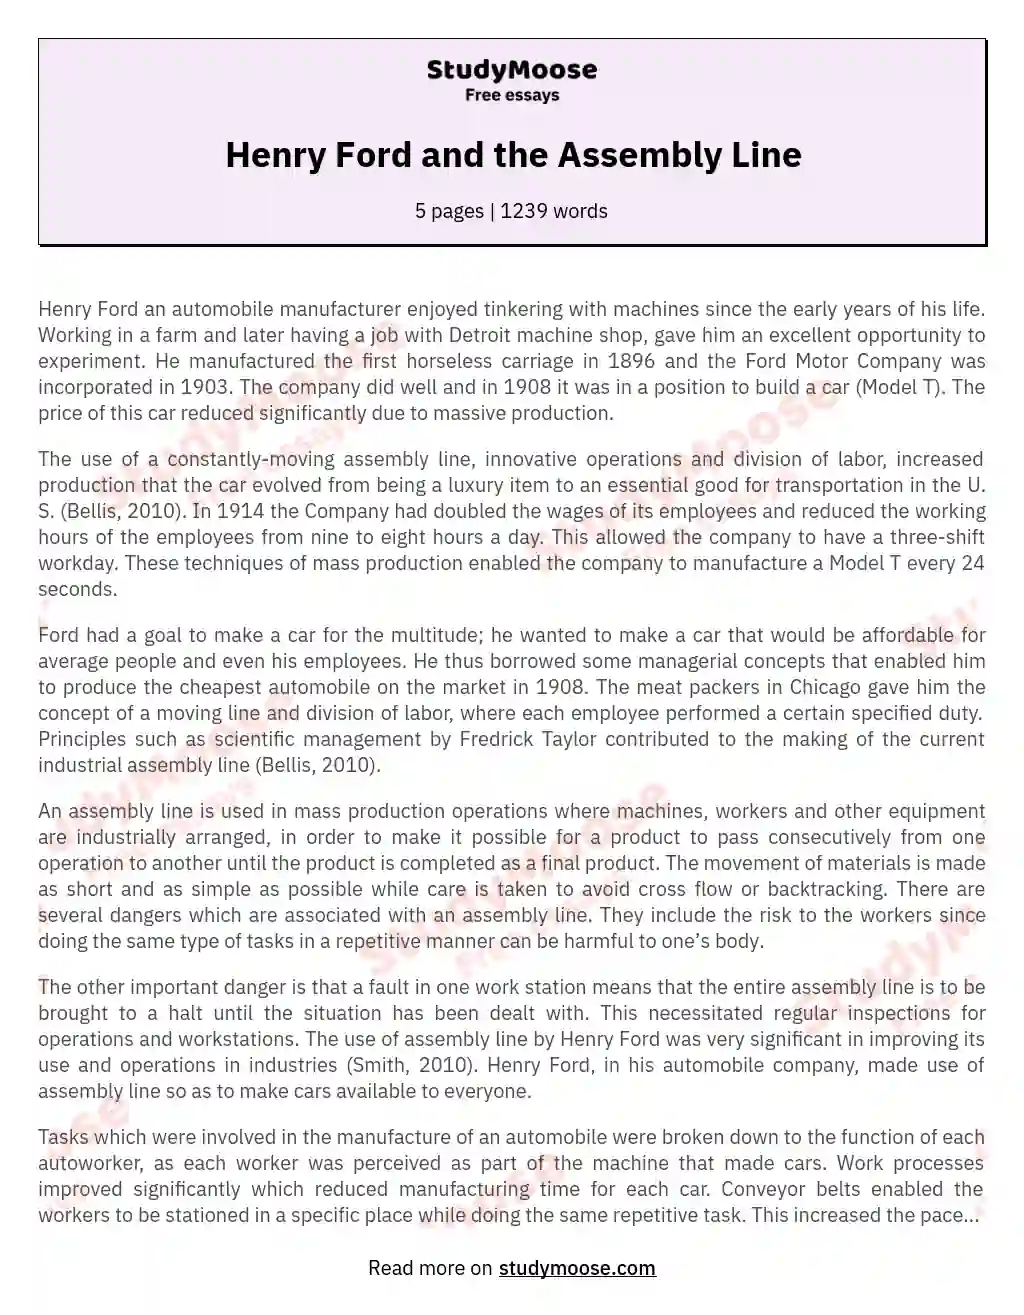 Henry Ford and the Assembly Line essay